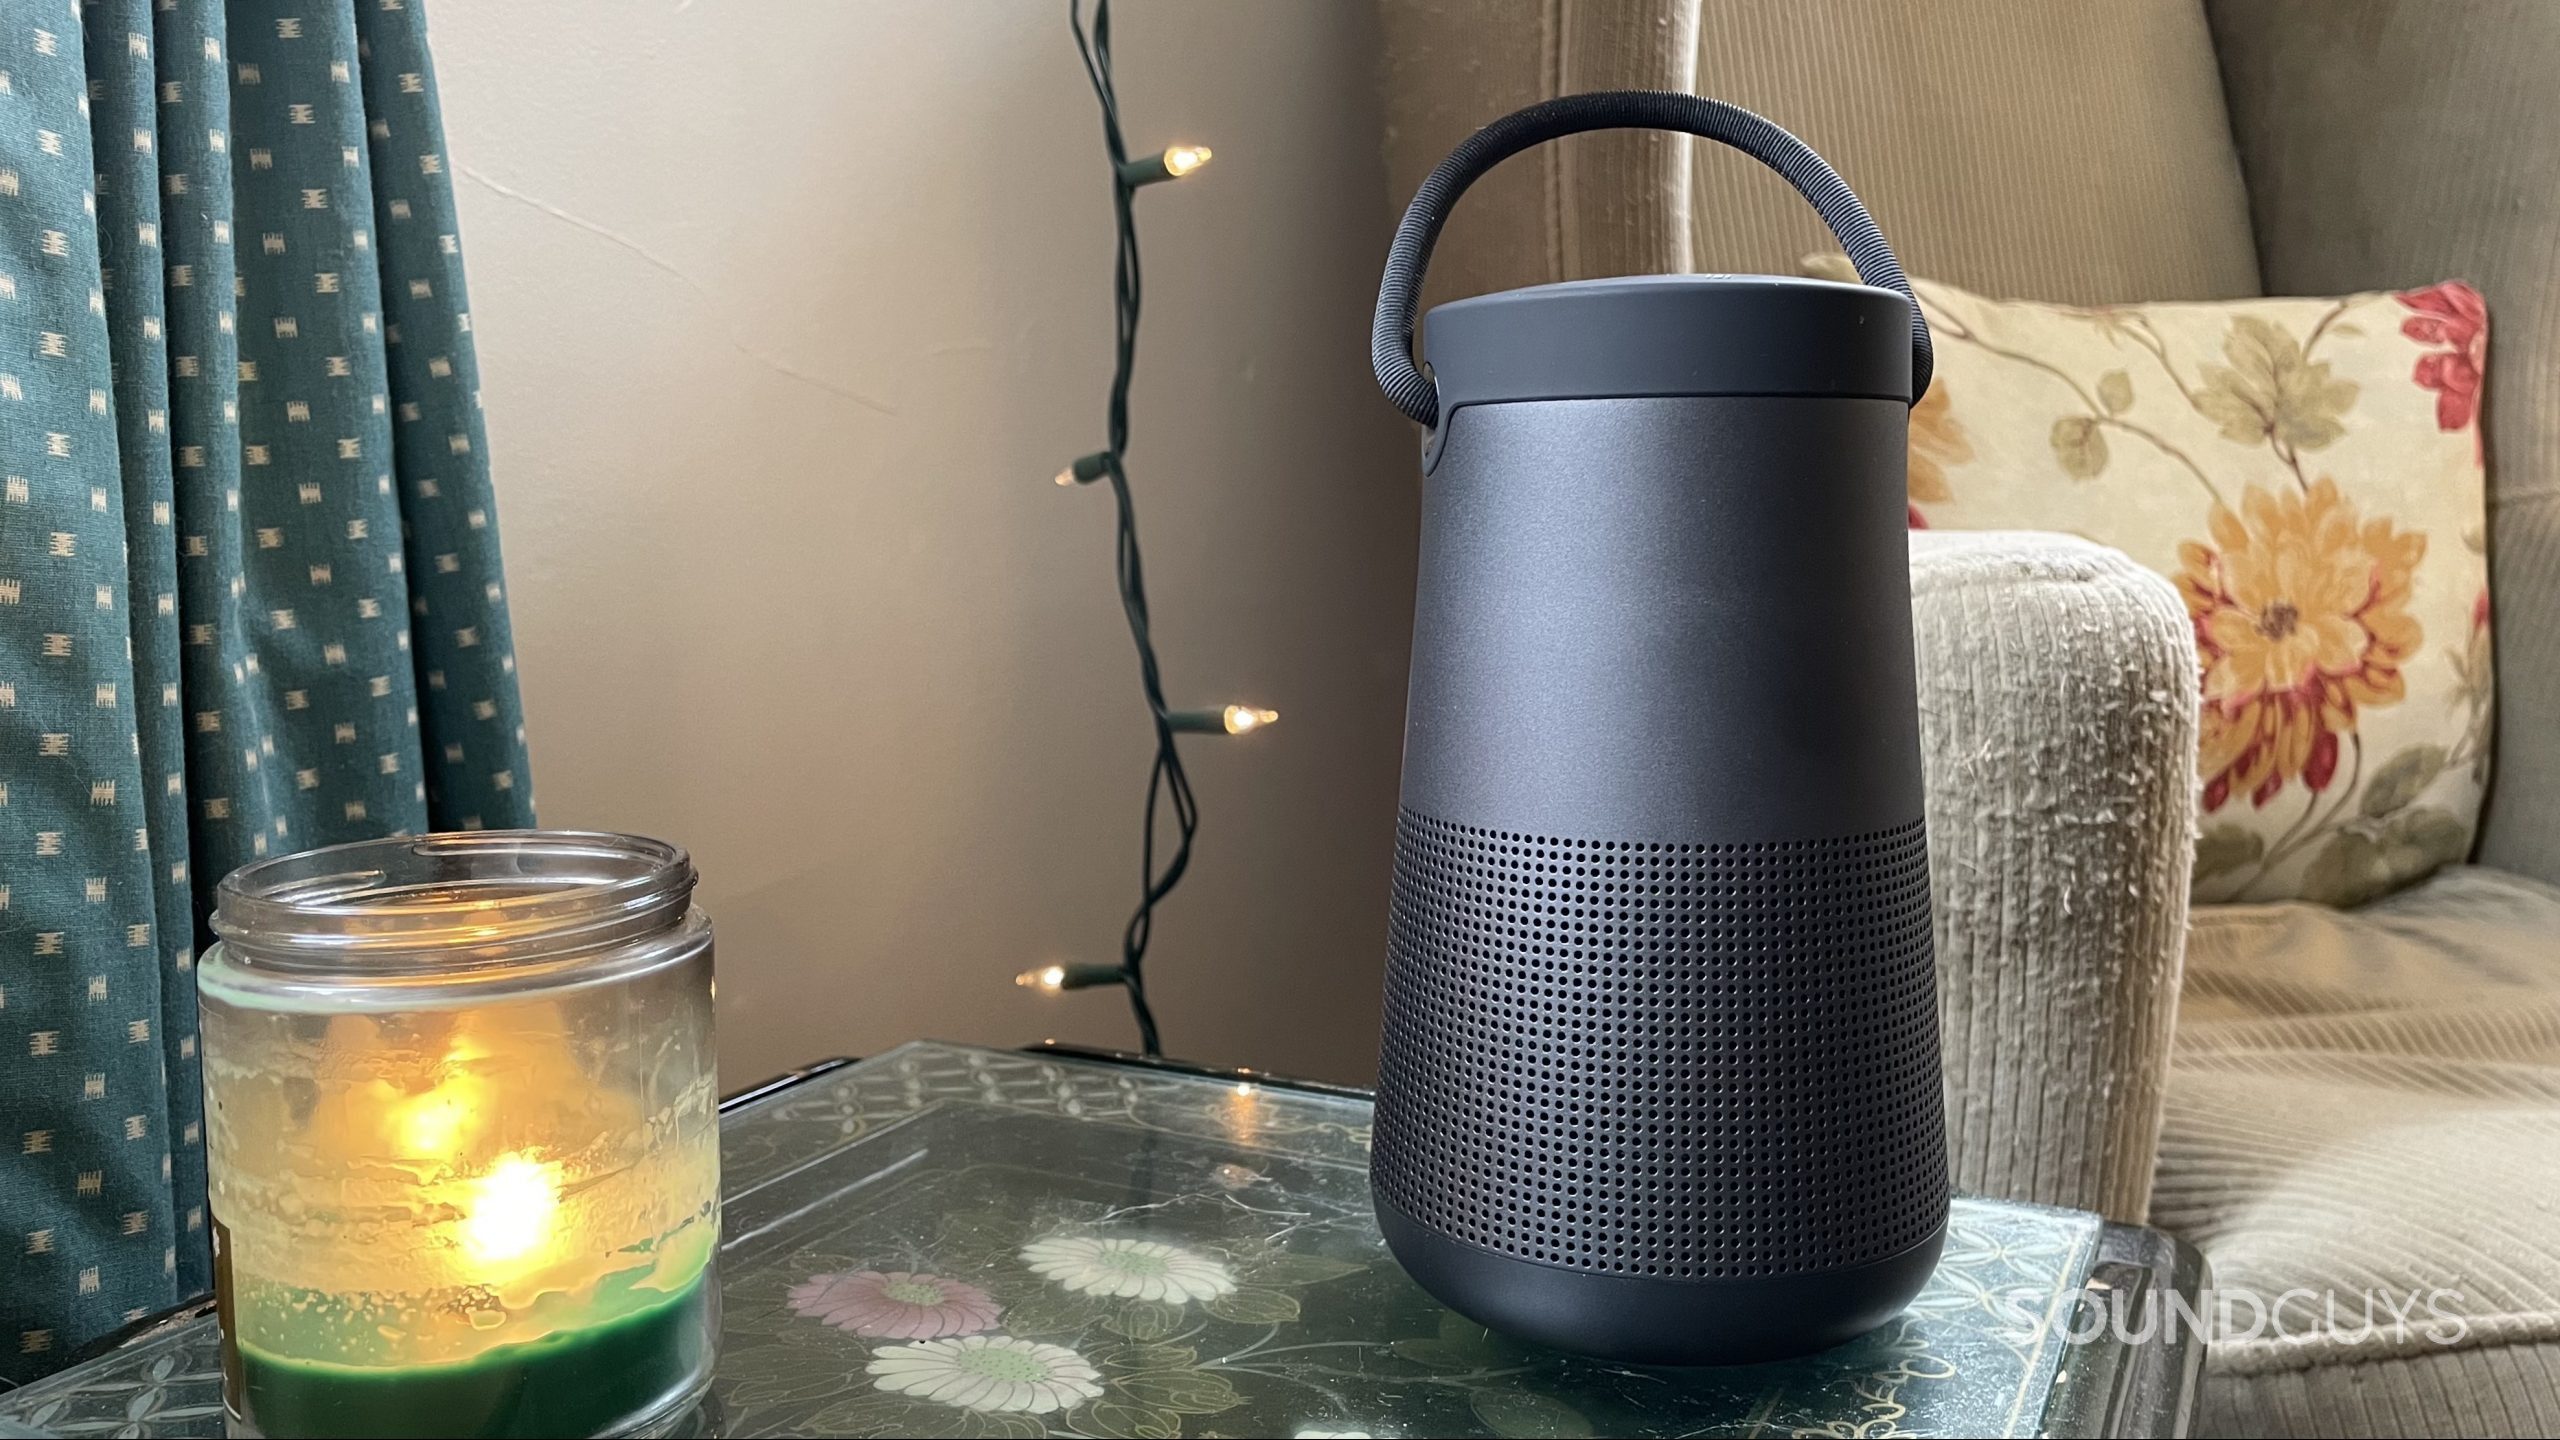 Bose SoundLink Revolve+ II on a side table with a candle.